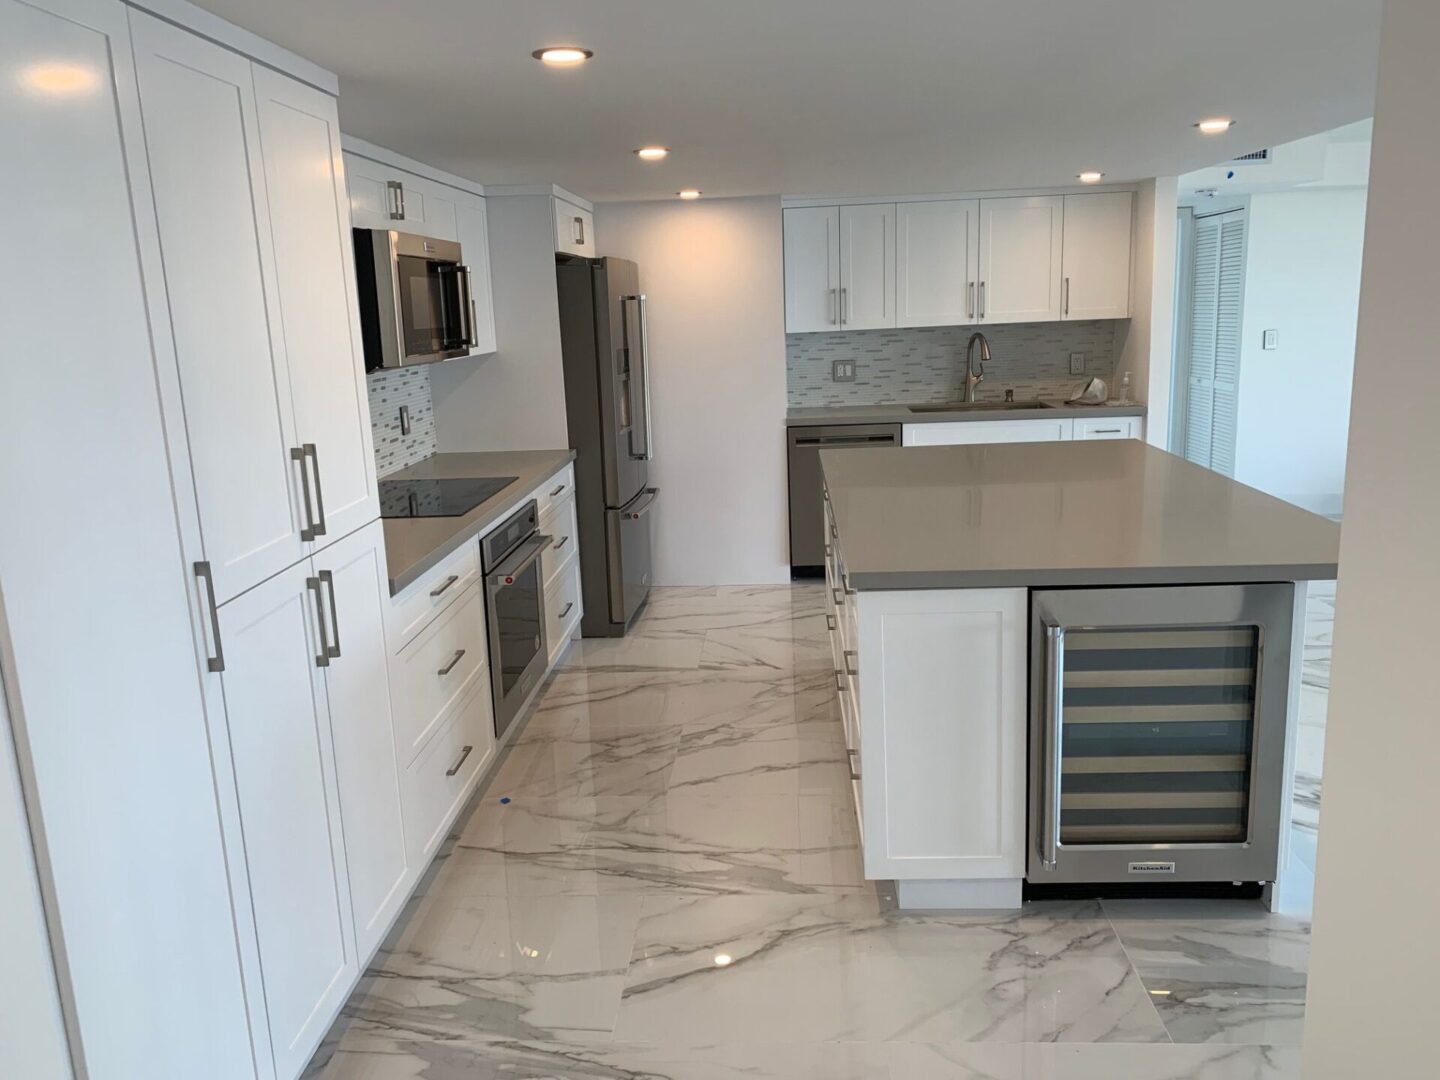 A kitchen with white cabinets and marble floors.